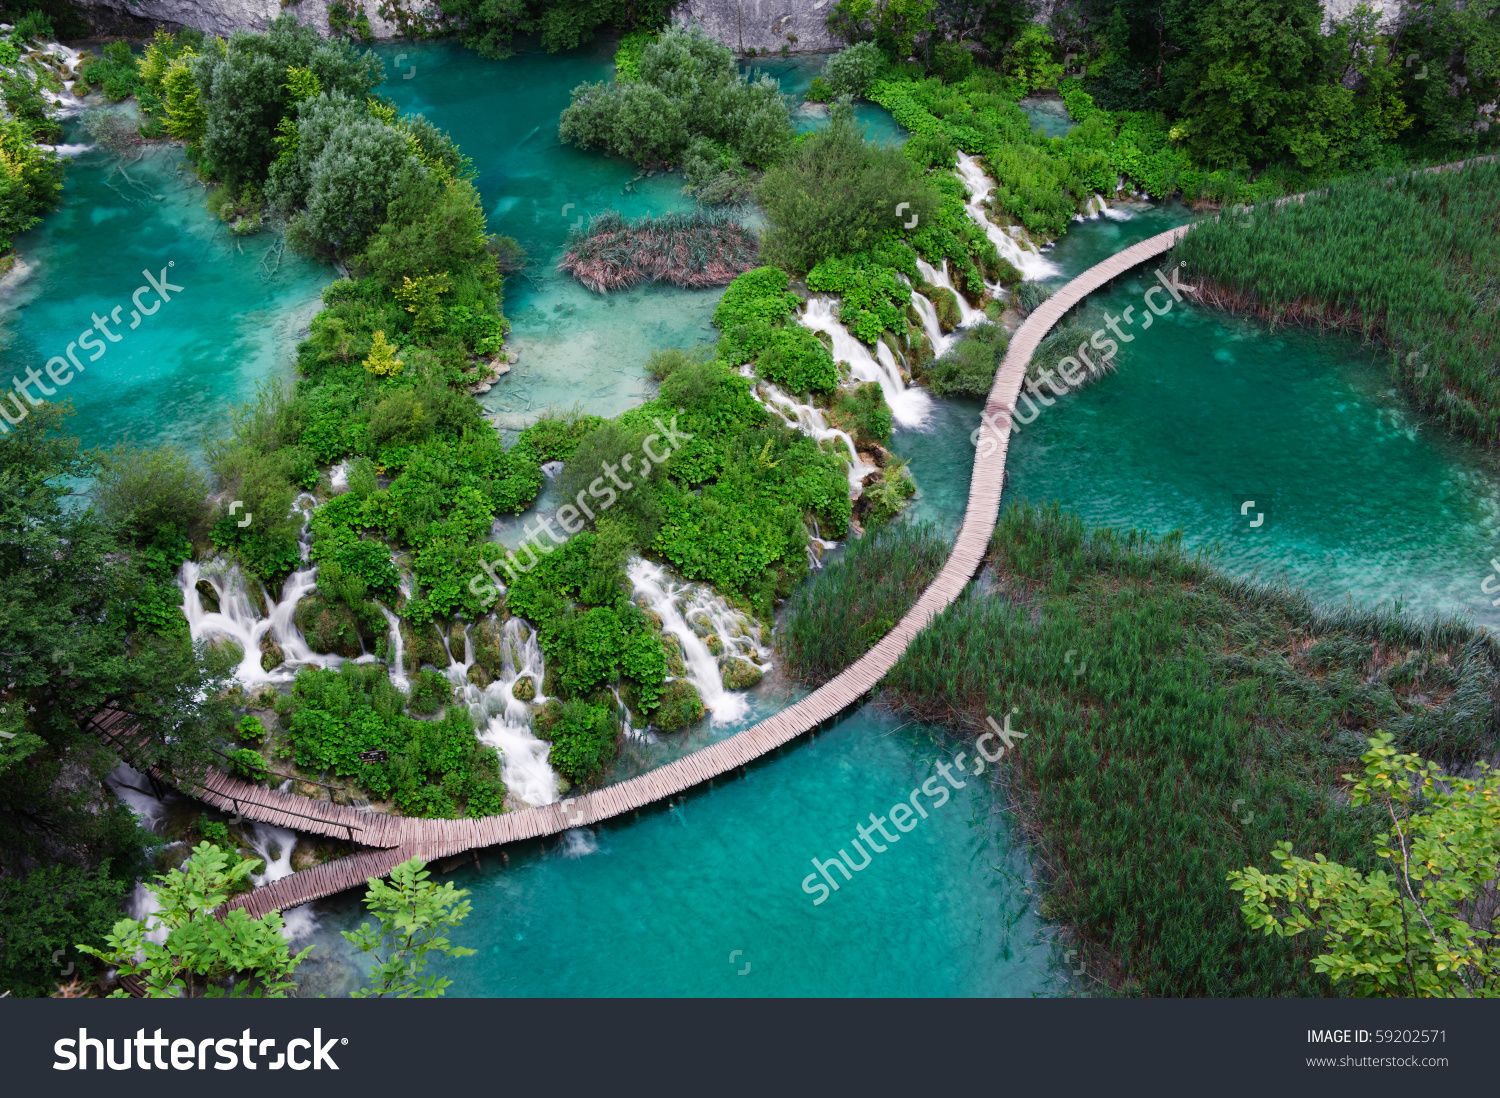 Plitvice National Park clipart #3, Download drawings